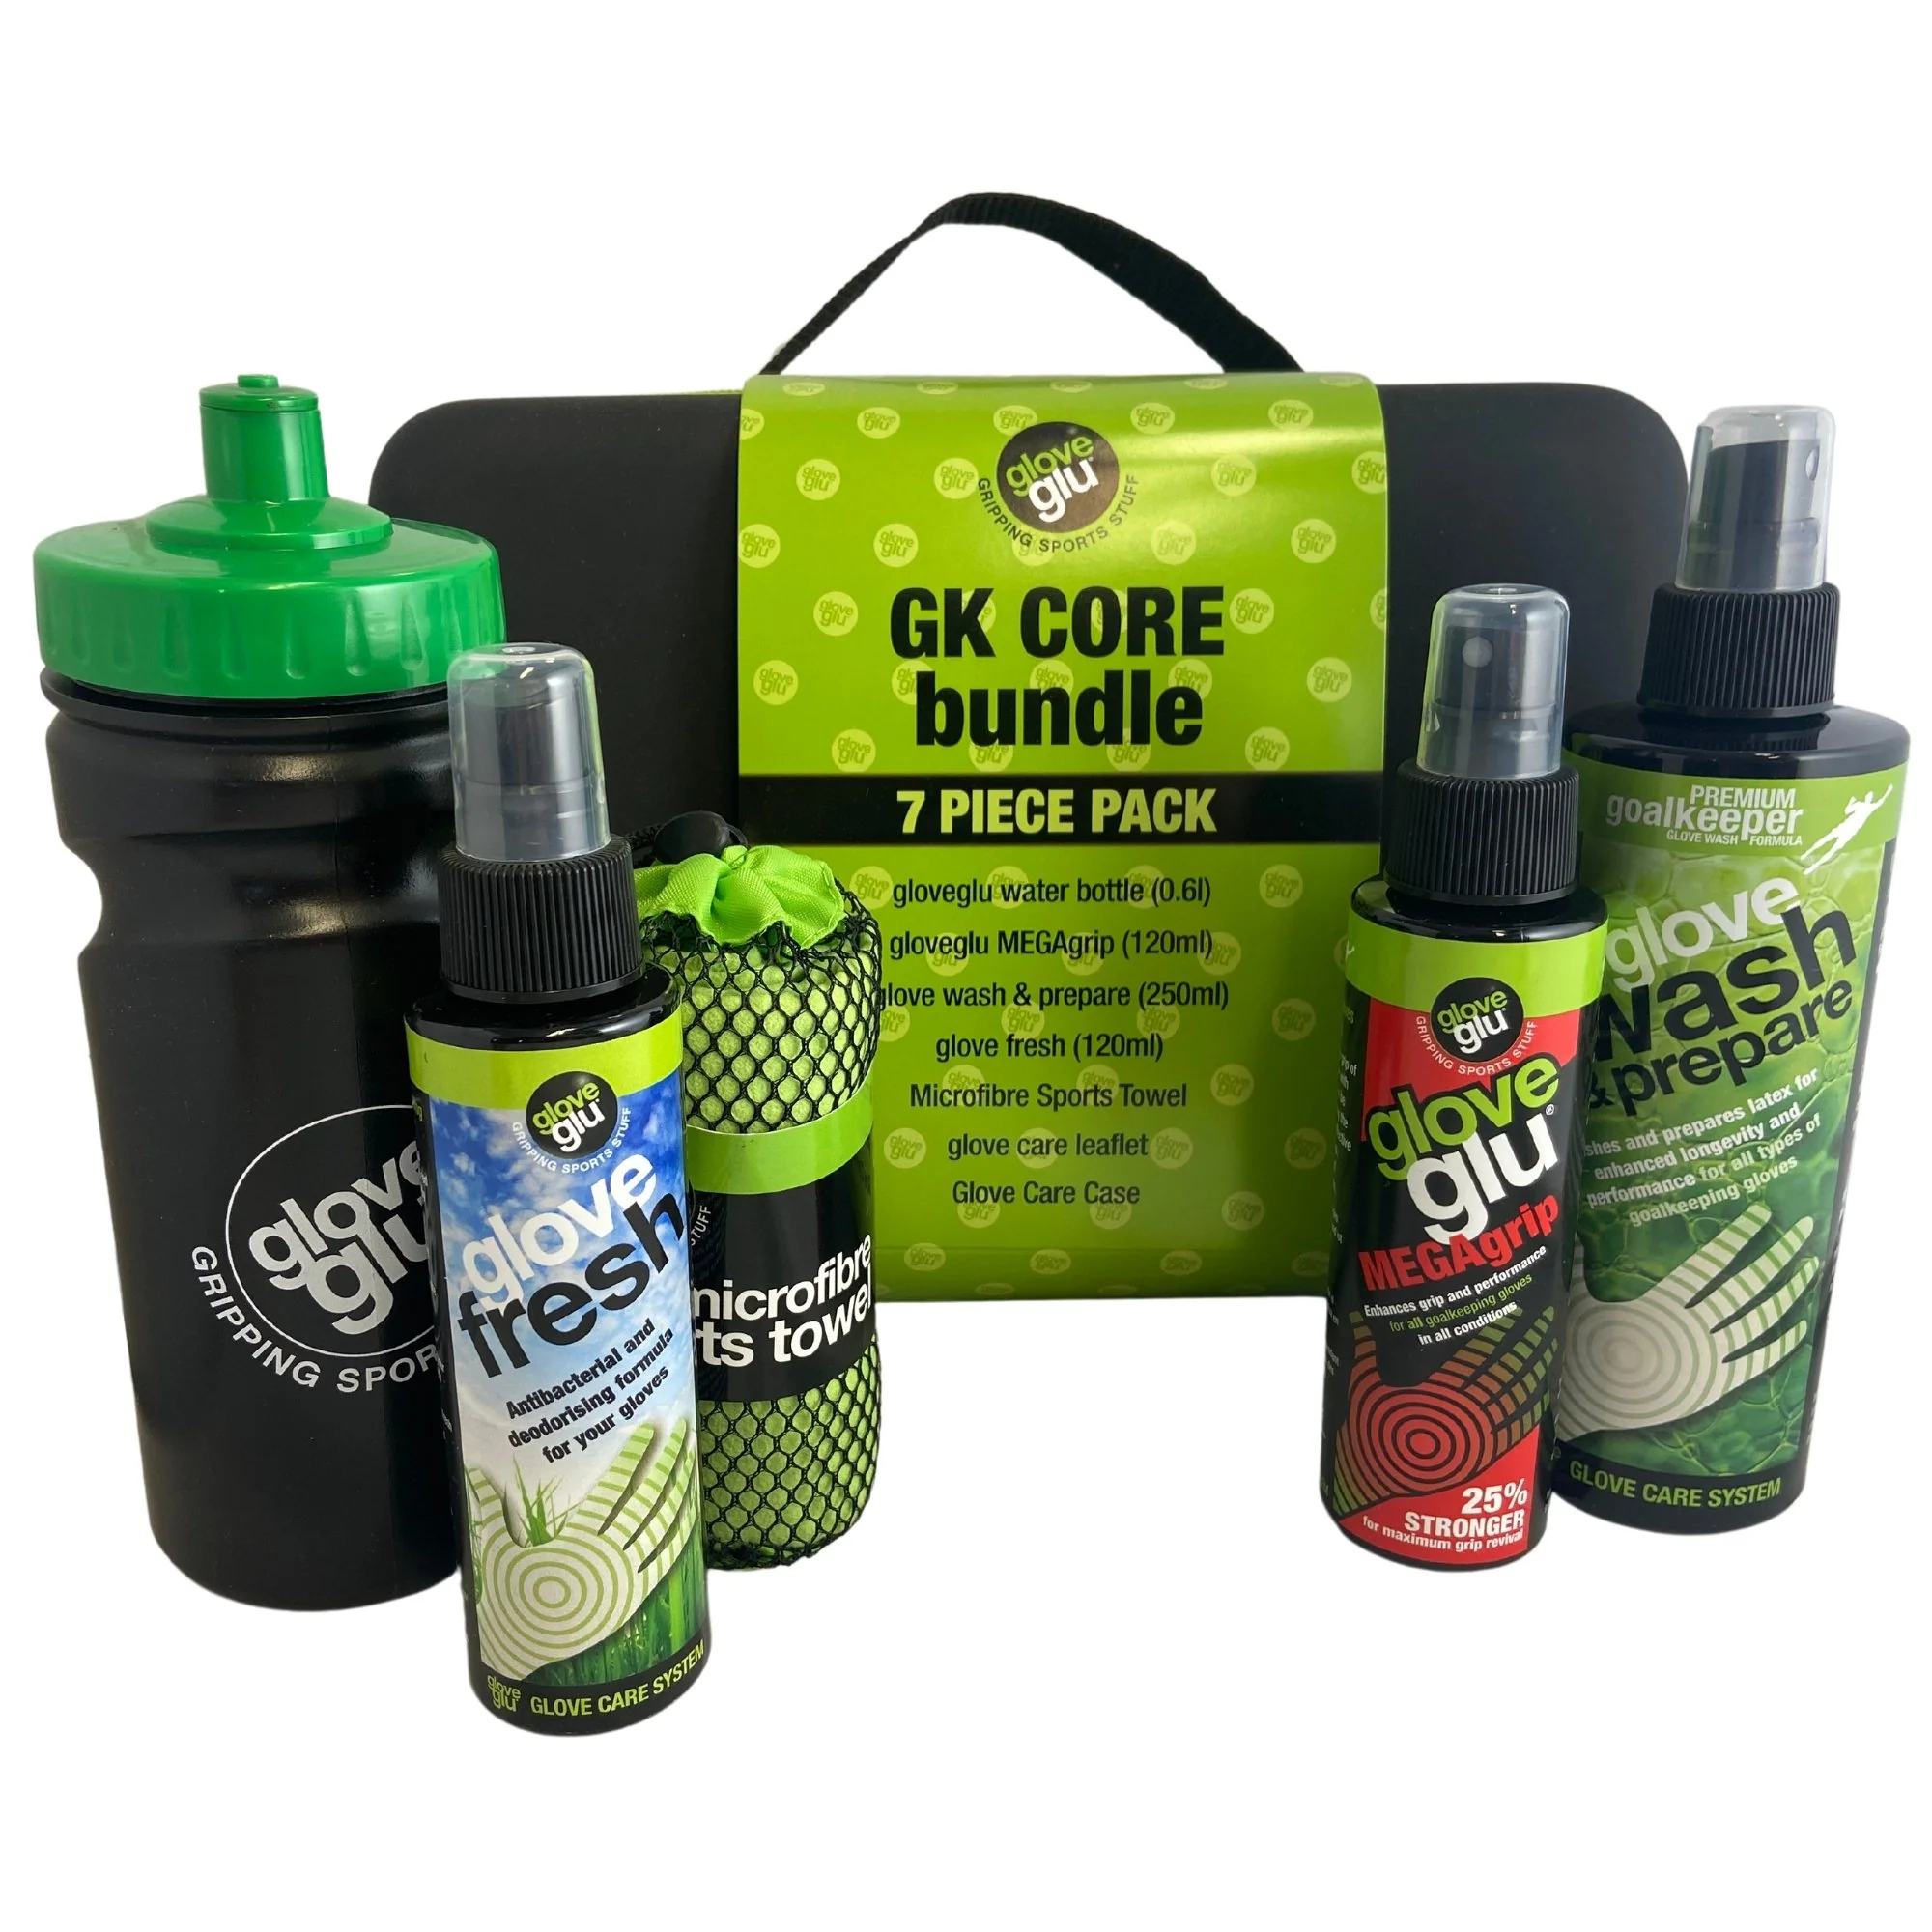 Glove glu System 120ml x 3 Units Maintenance And Care For Goalkeeping  Gloves Kit